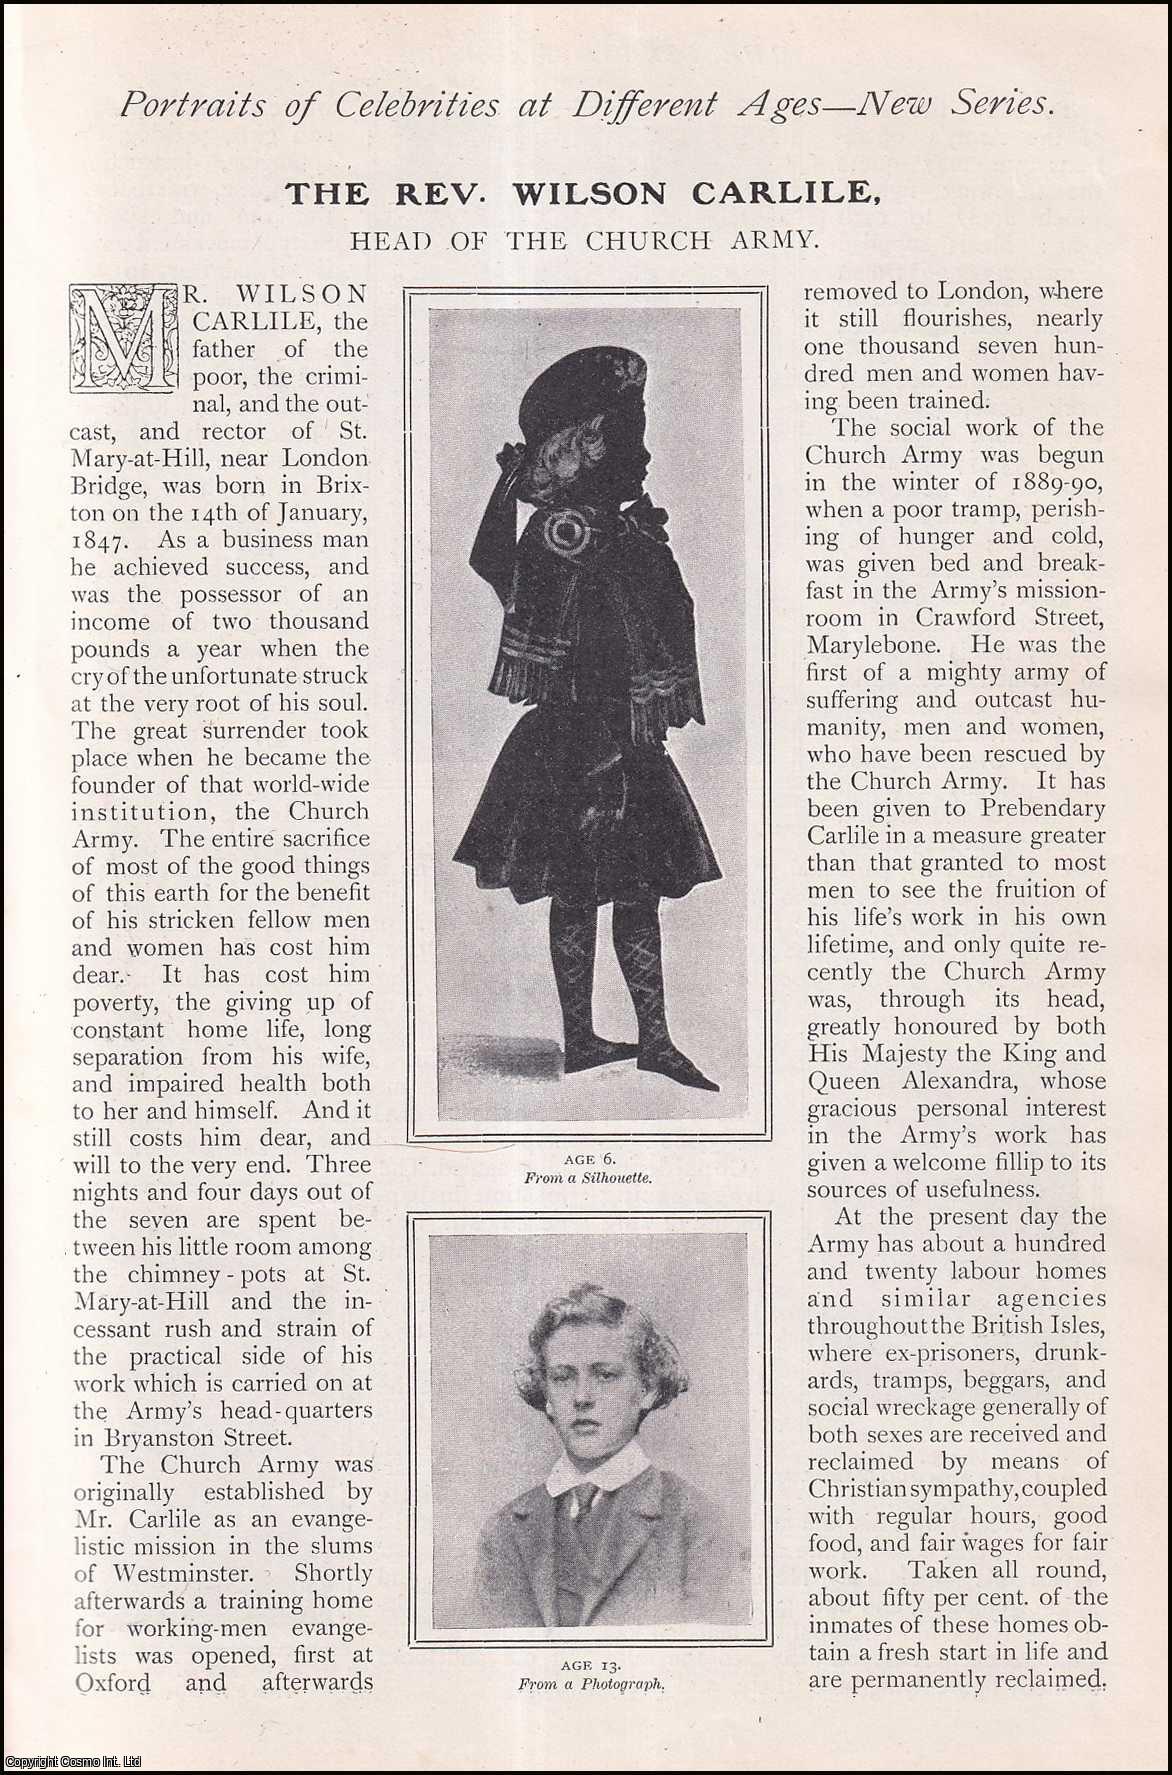 No Author Stated - The Rev. Wilson Carlile, head of the church army. Portraits of Celebrities at Different Ages. An uncommon original article from The Strand Magazine, 1906.